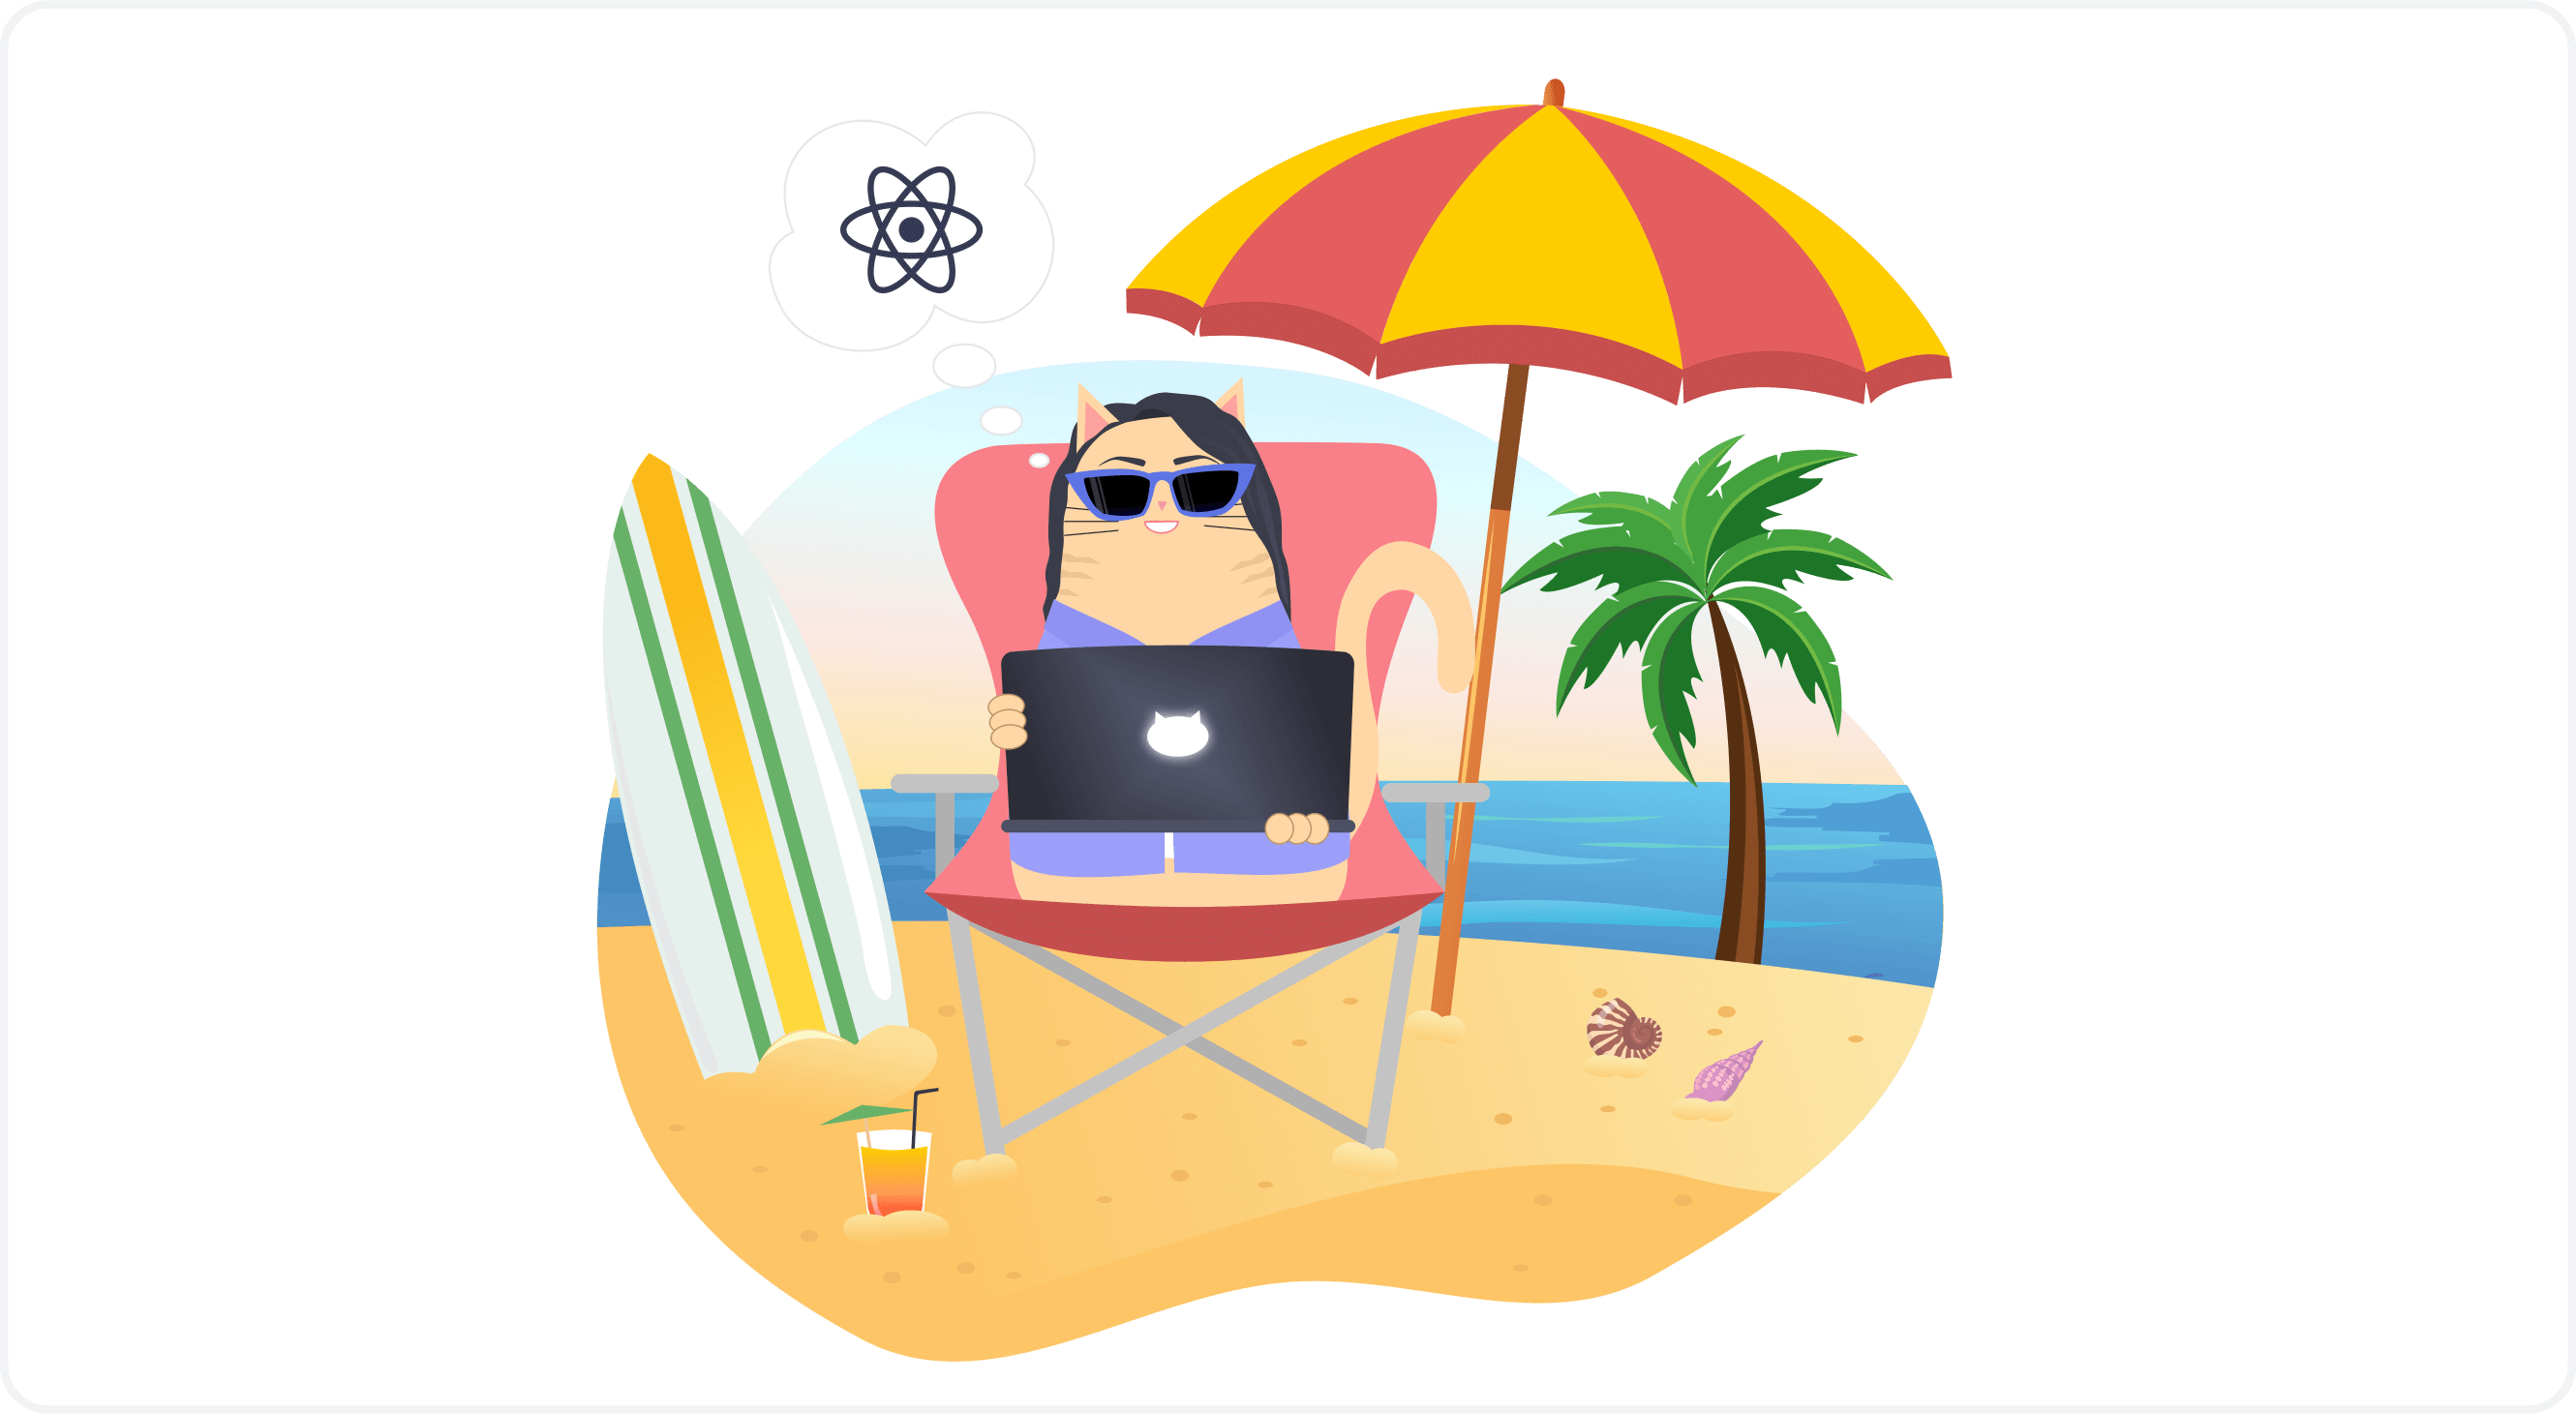 “React Canary” is the new Canary Island of the React ecosystem (pun intended). It's a prime spot for React developers, introduced by the React Lab Team, allowing the adoption of new, stable features in their near-final design stage, well before their stable server release.